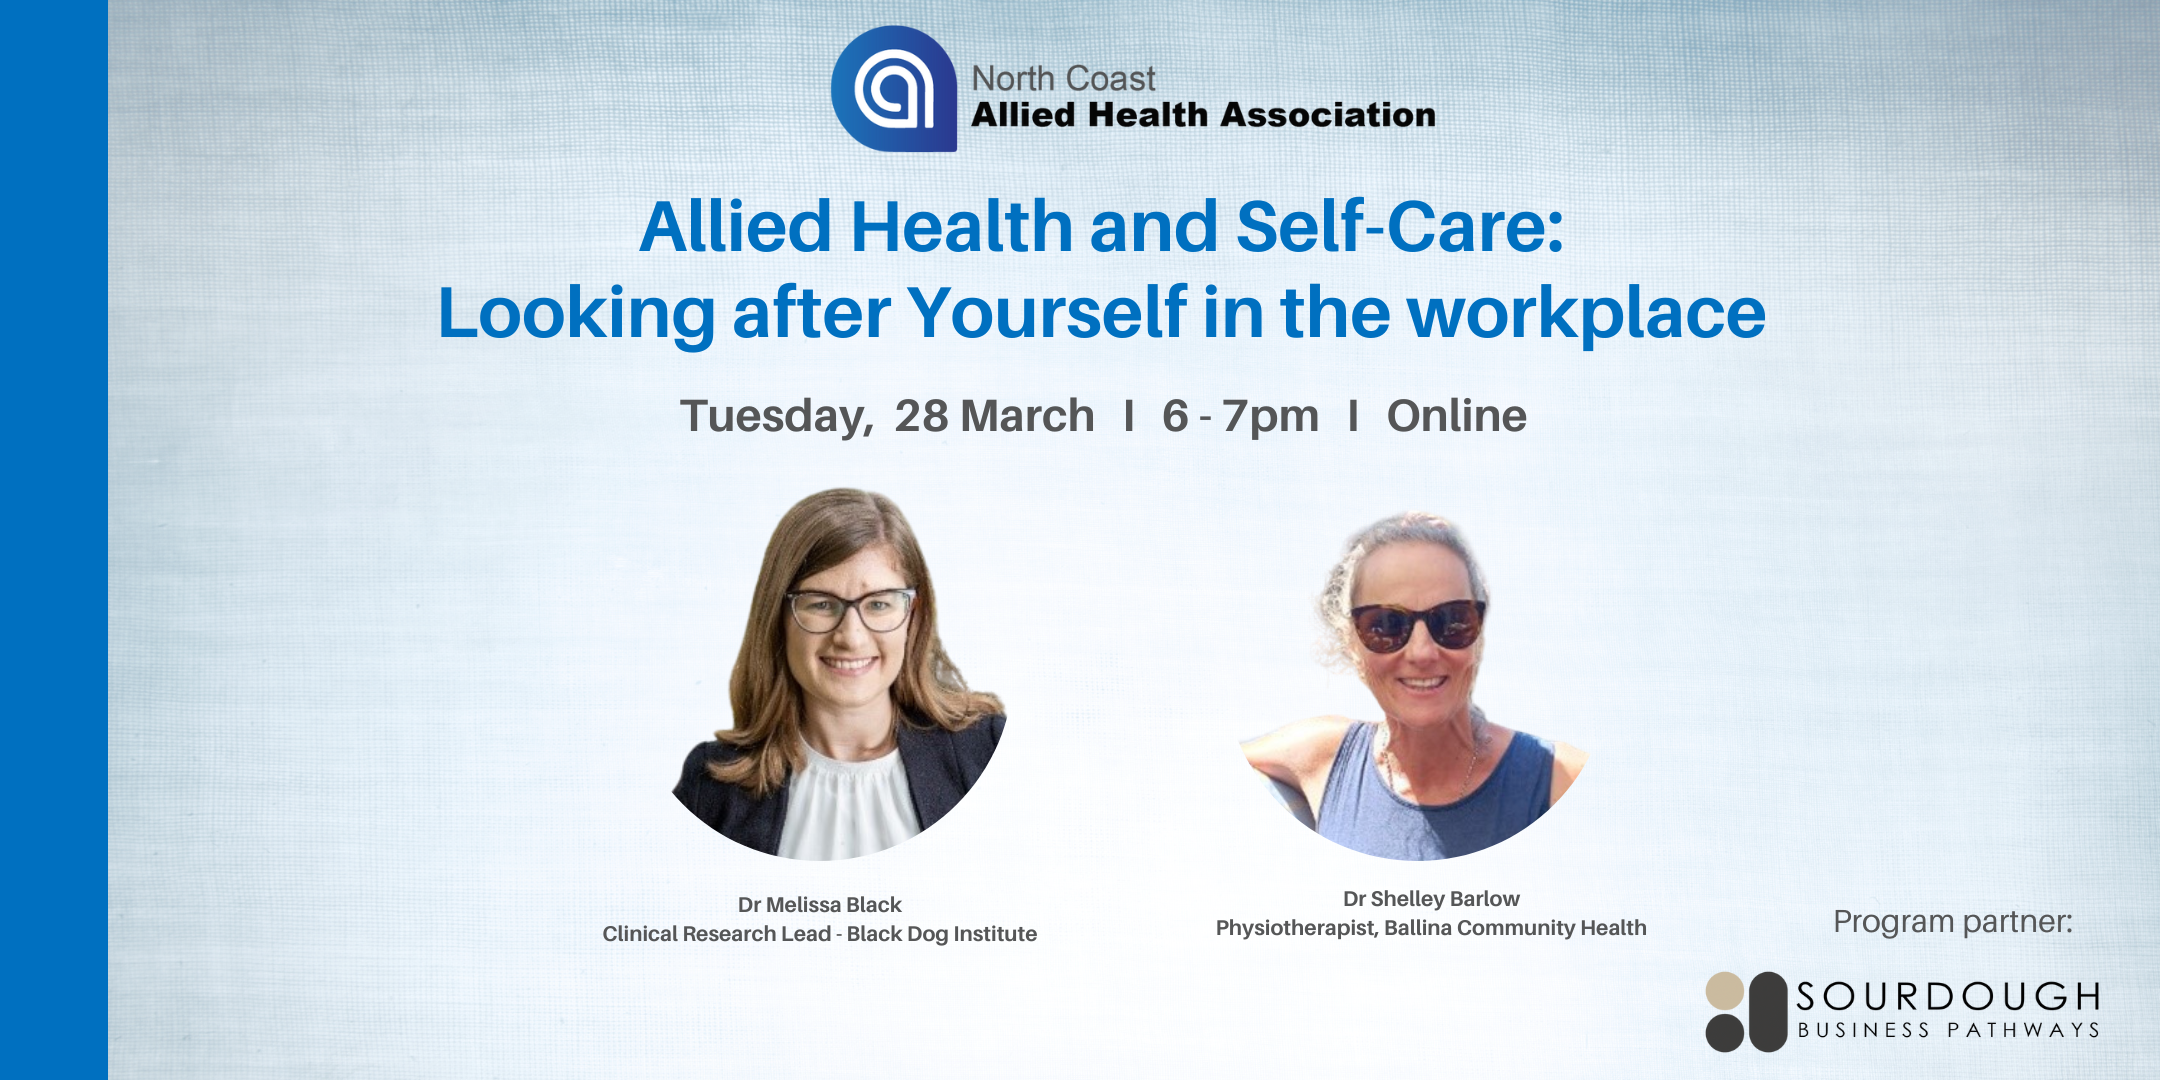 Allied Health and Self-care: Looking after yourself in the workplace